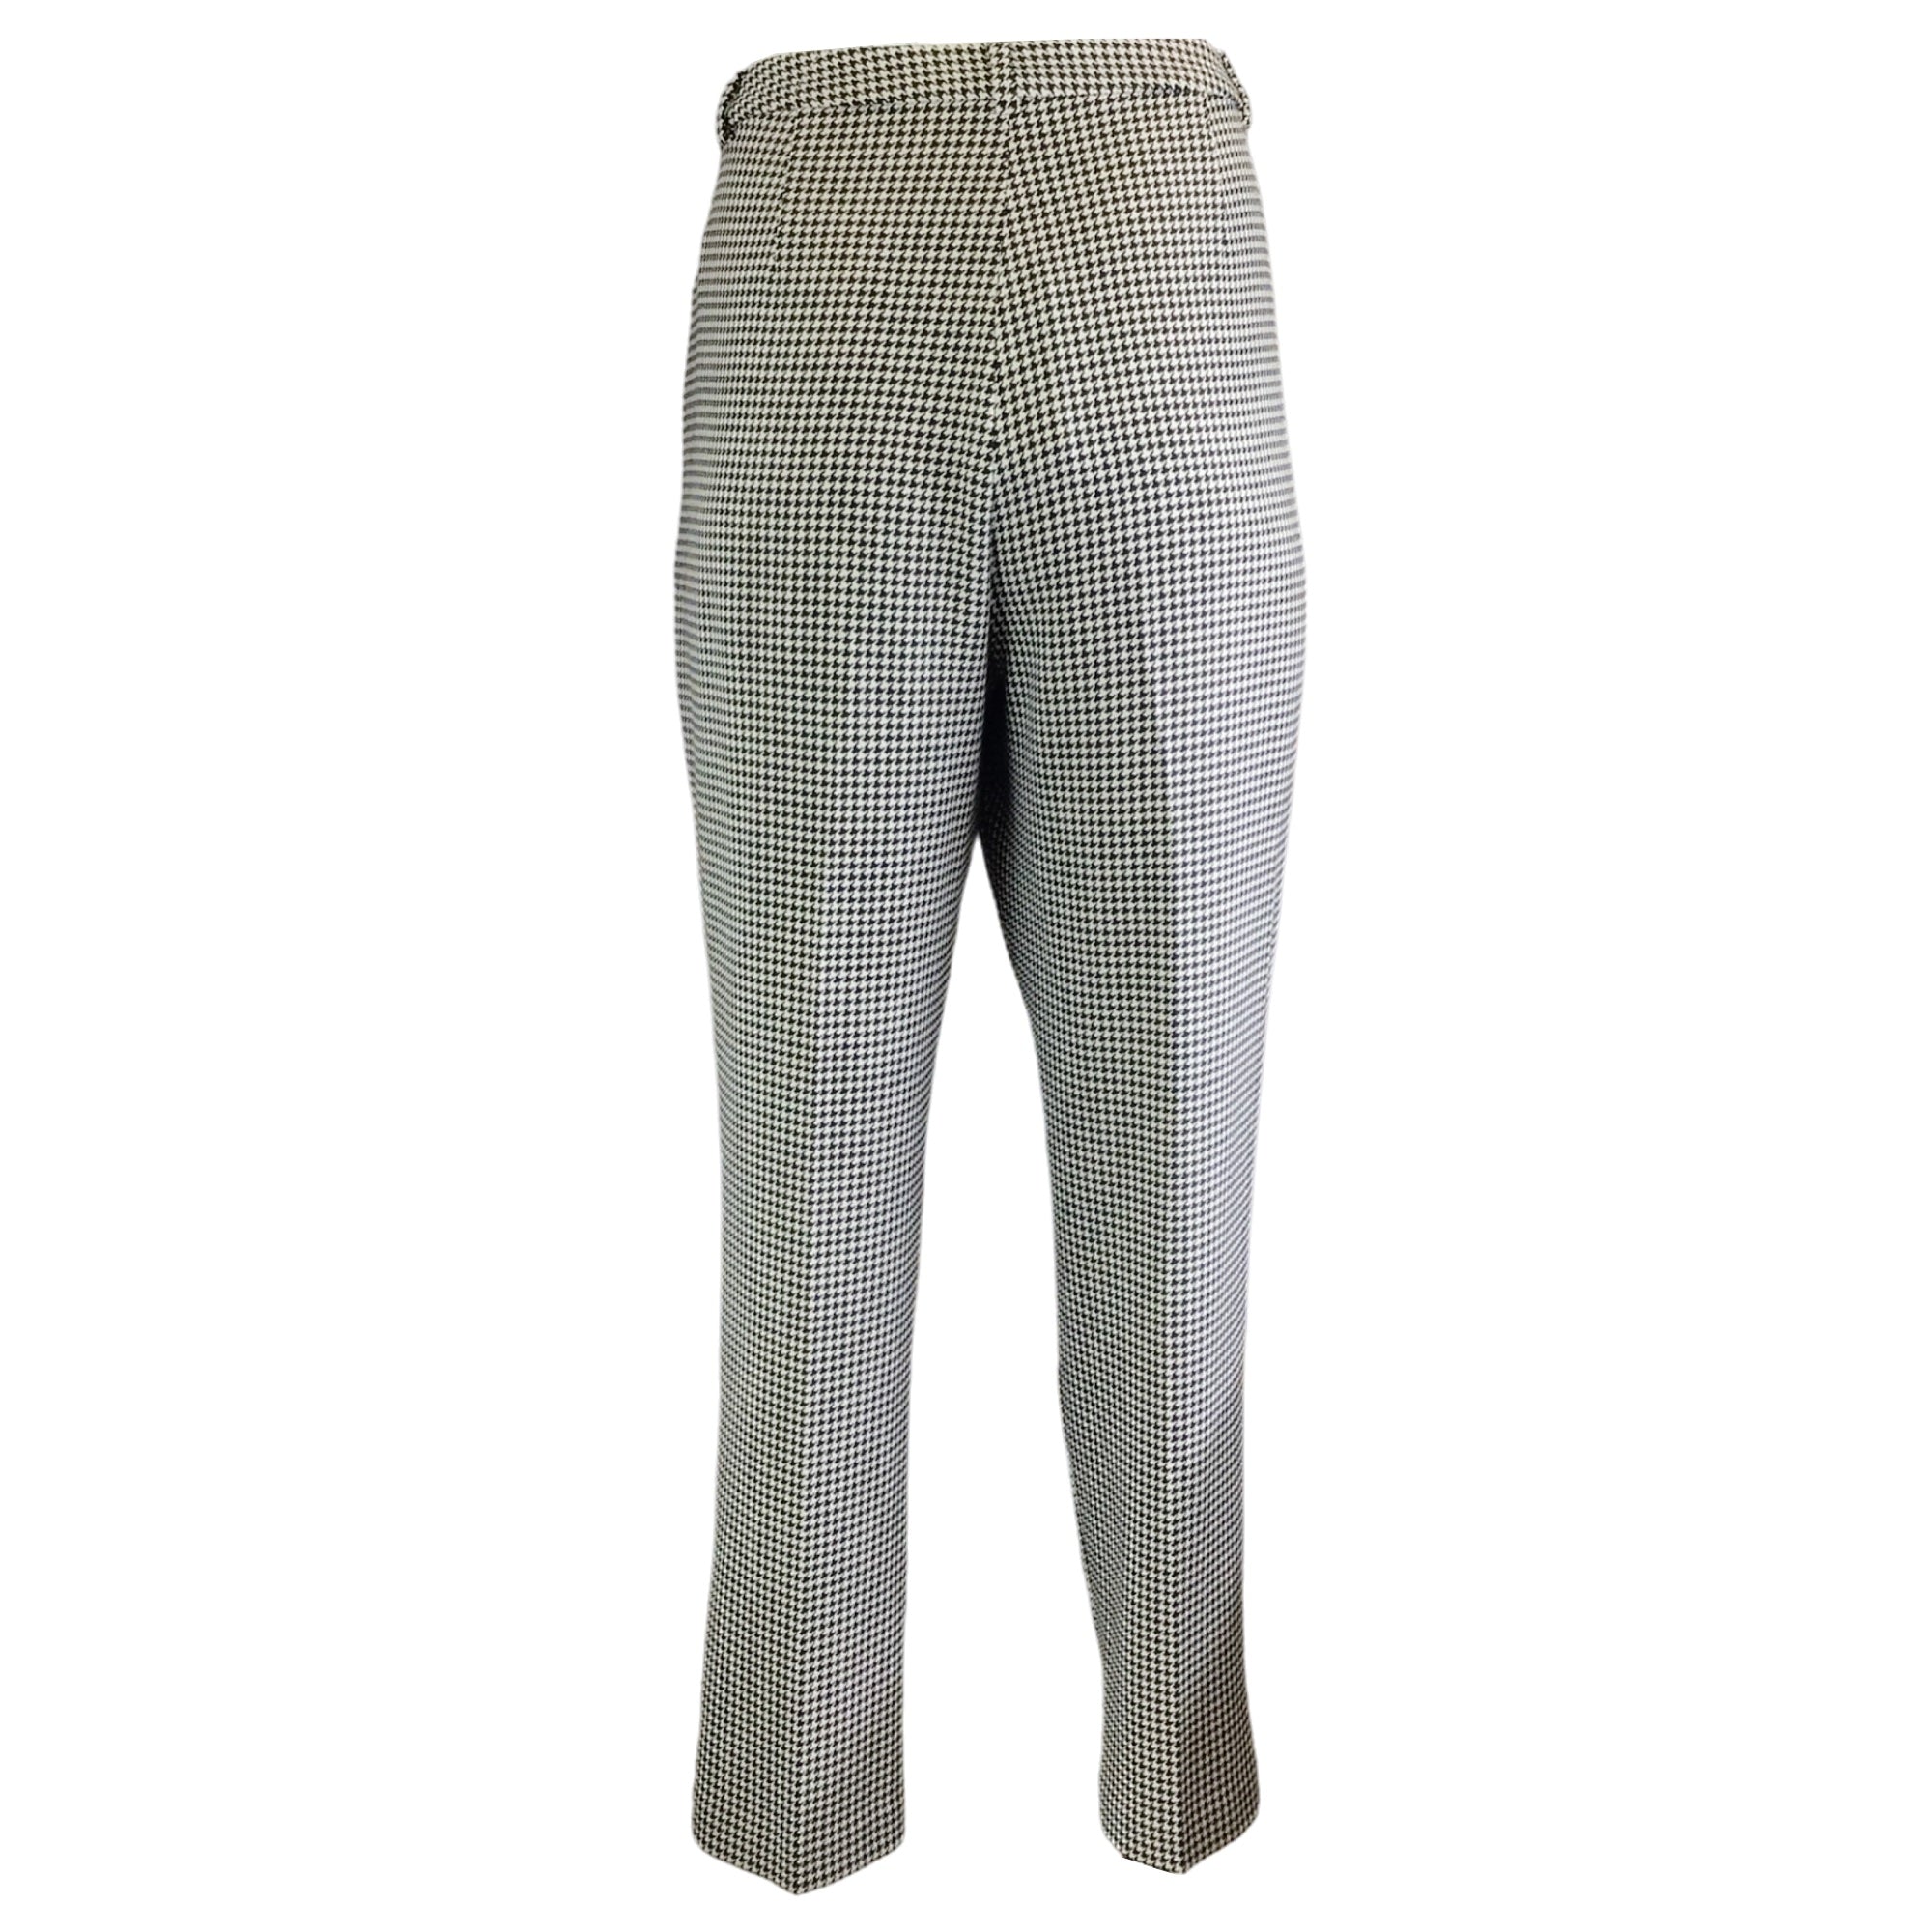 L'Agence Black / Ivory Houndstooth Logan Trousers